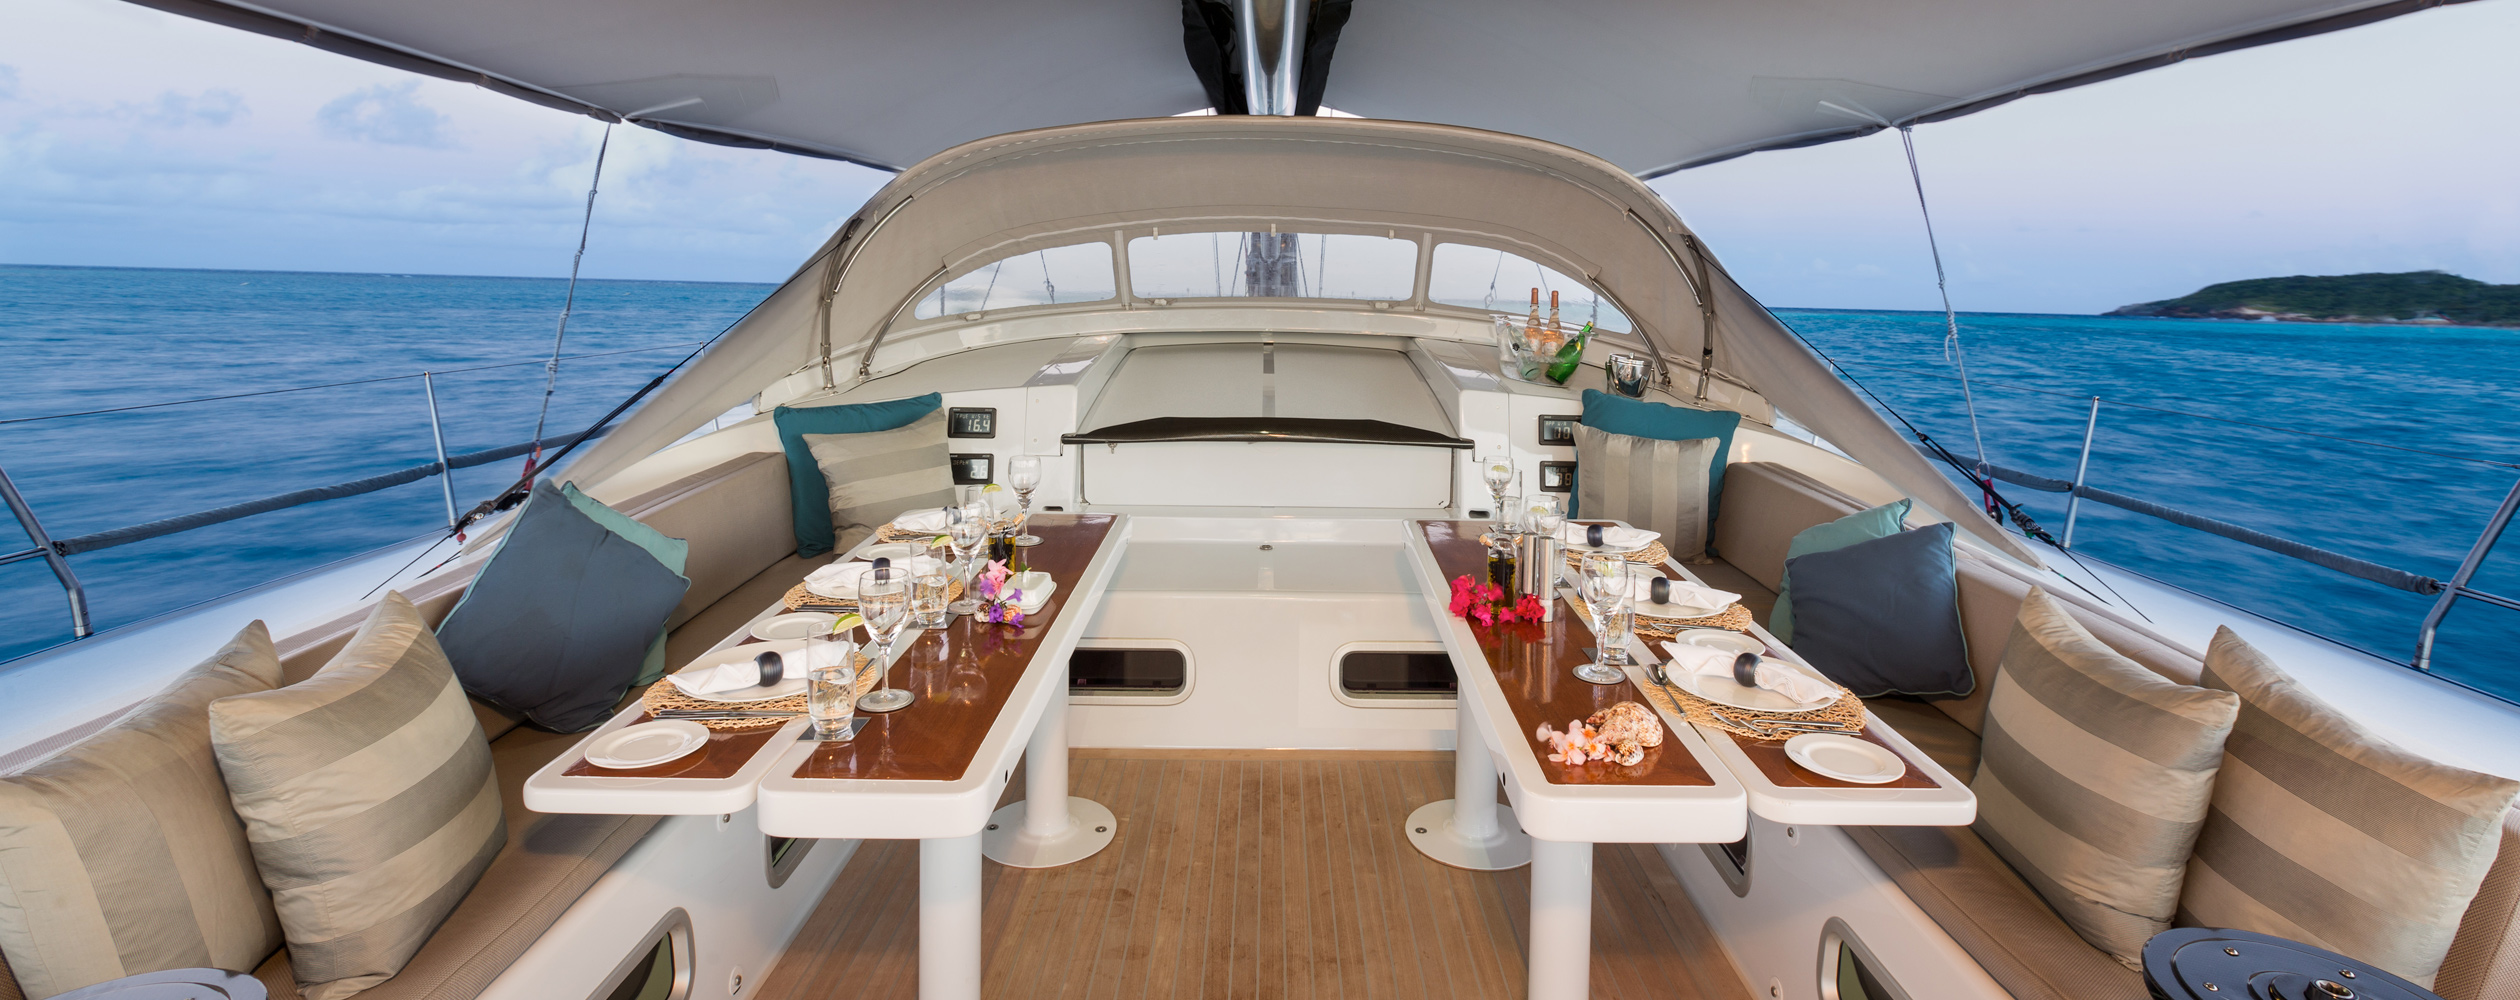 Planning a Summer Yacht Party on Private Yacht?